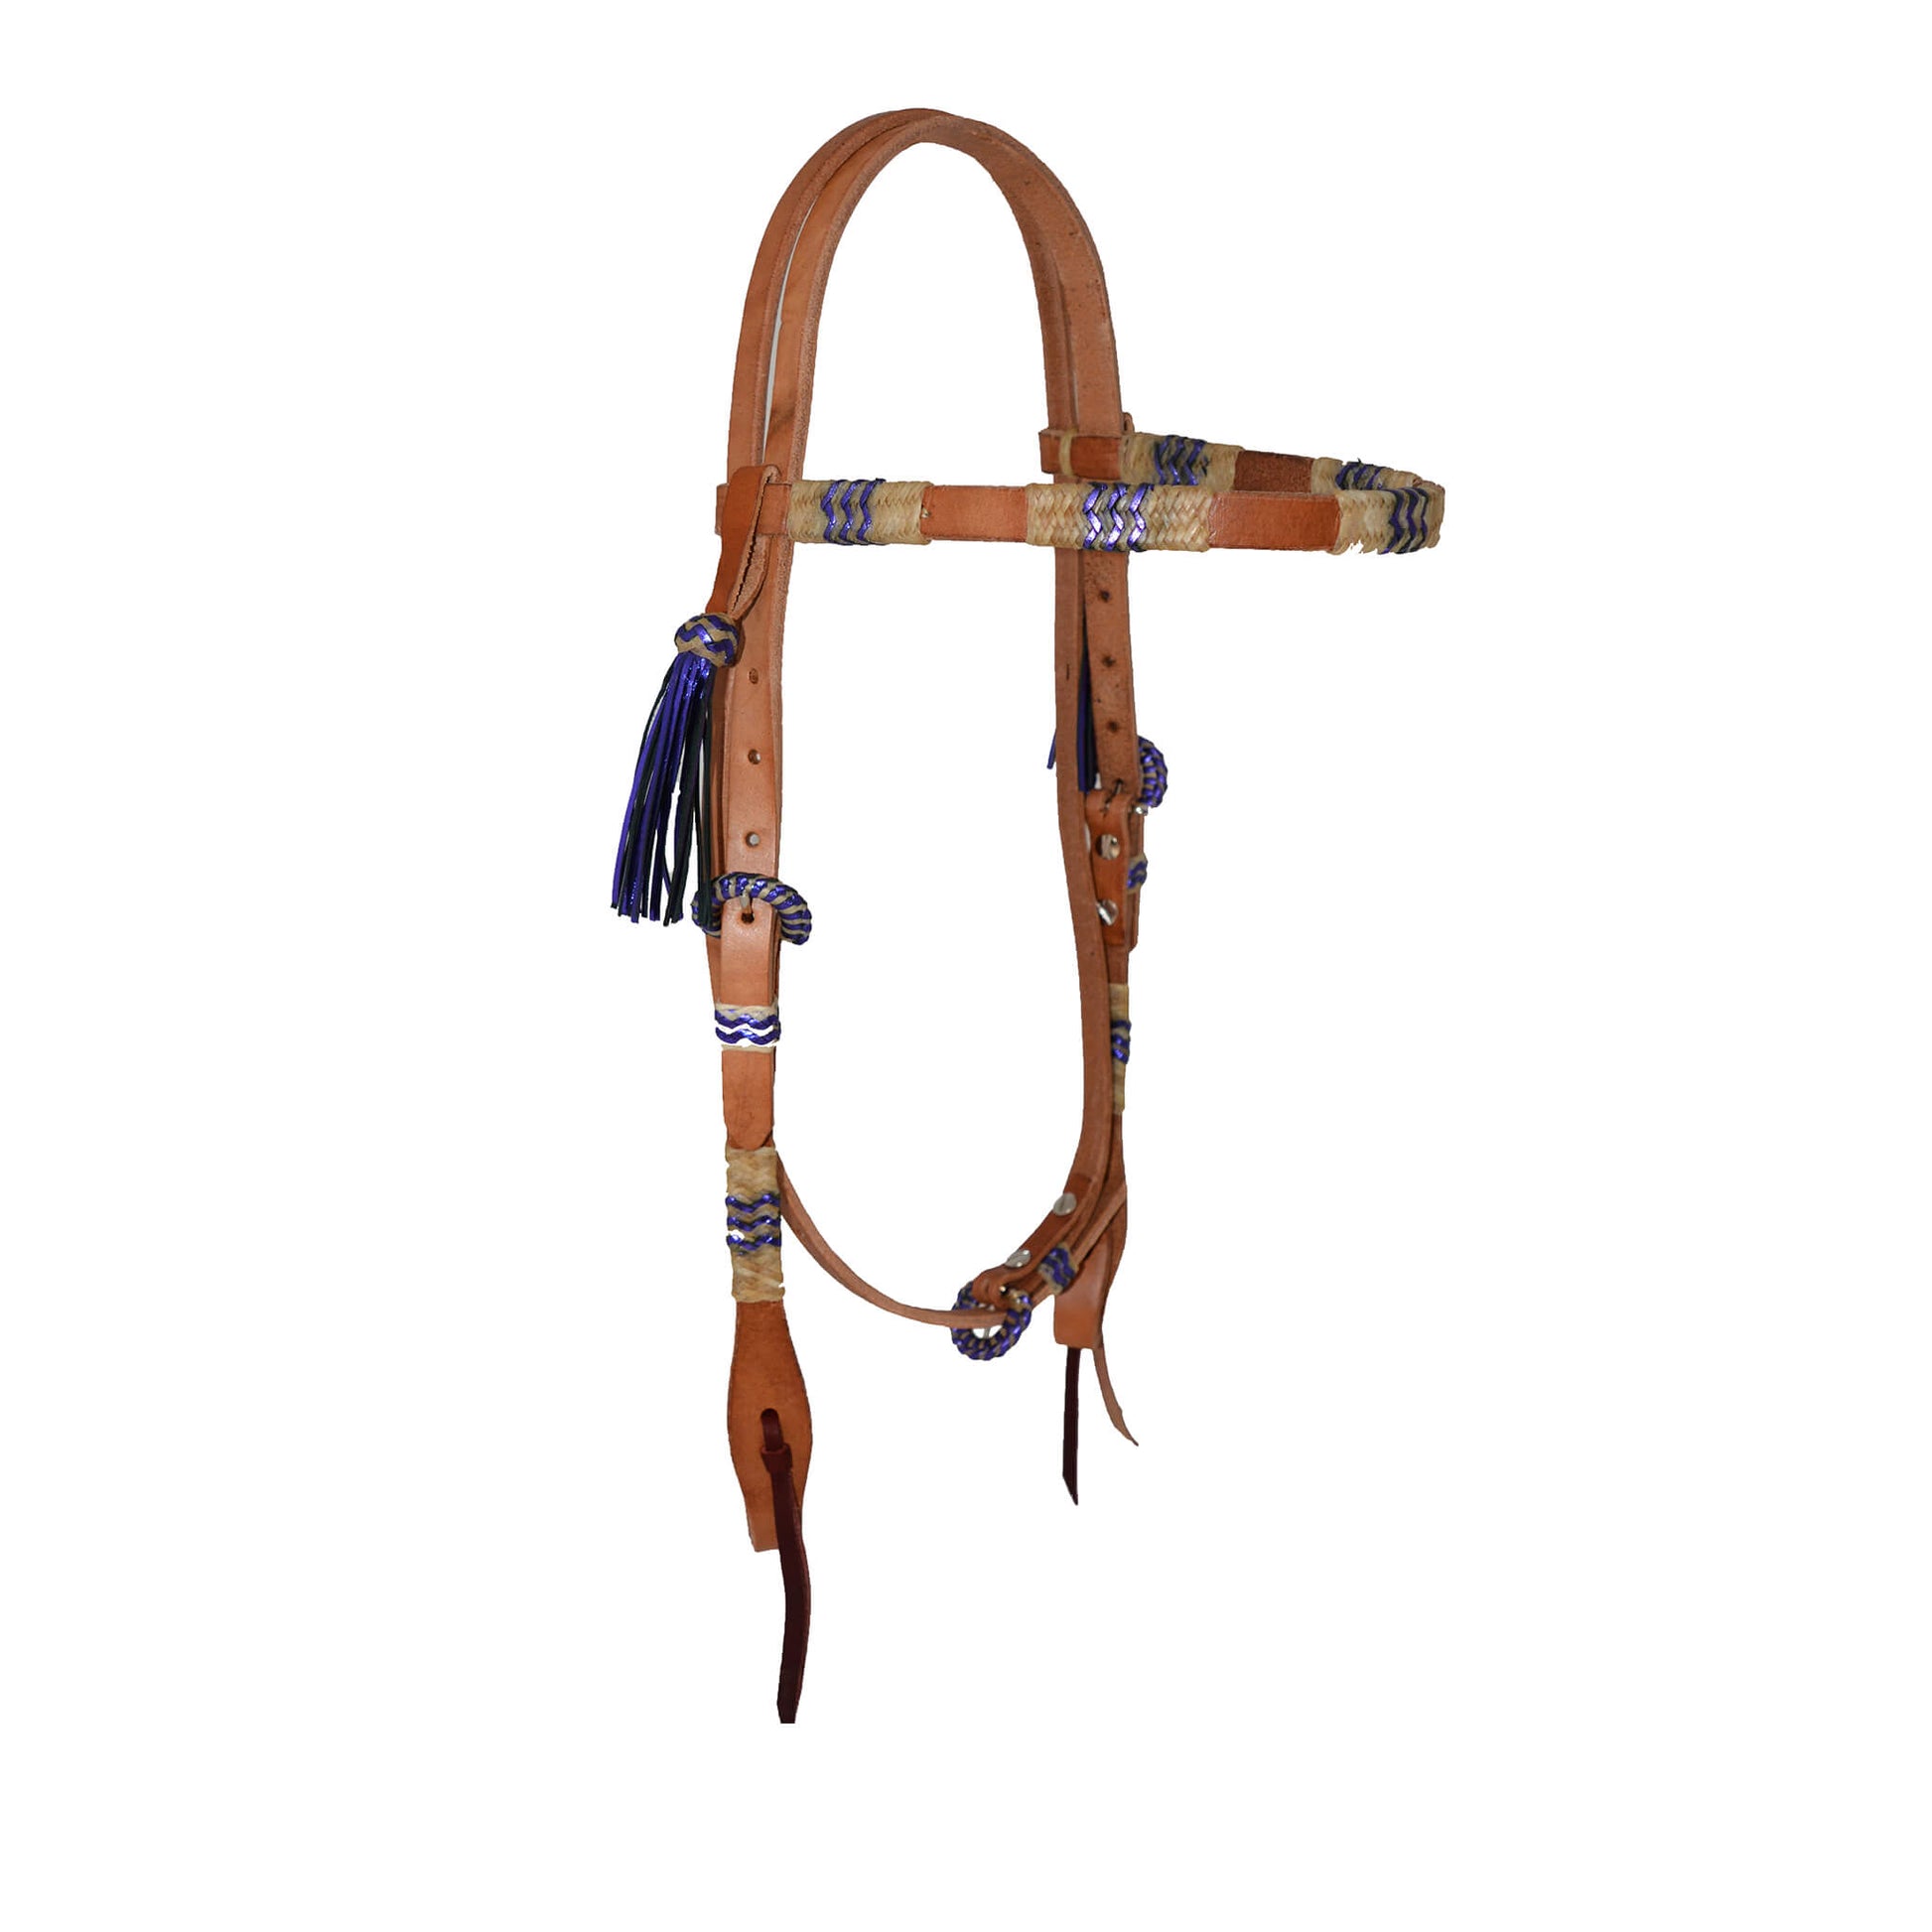 2030-BP 1/2 Straight browband headstall harness leather rawhide and  metallic purple braiding with Spanish lace hardware, braided loops, and  tassels